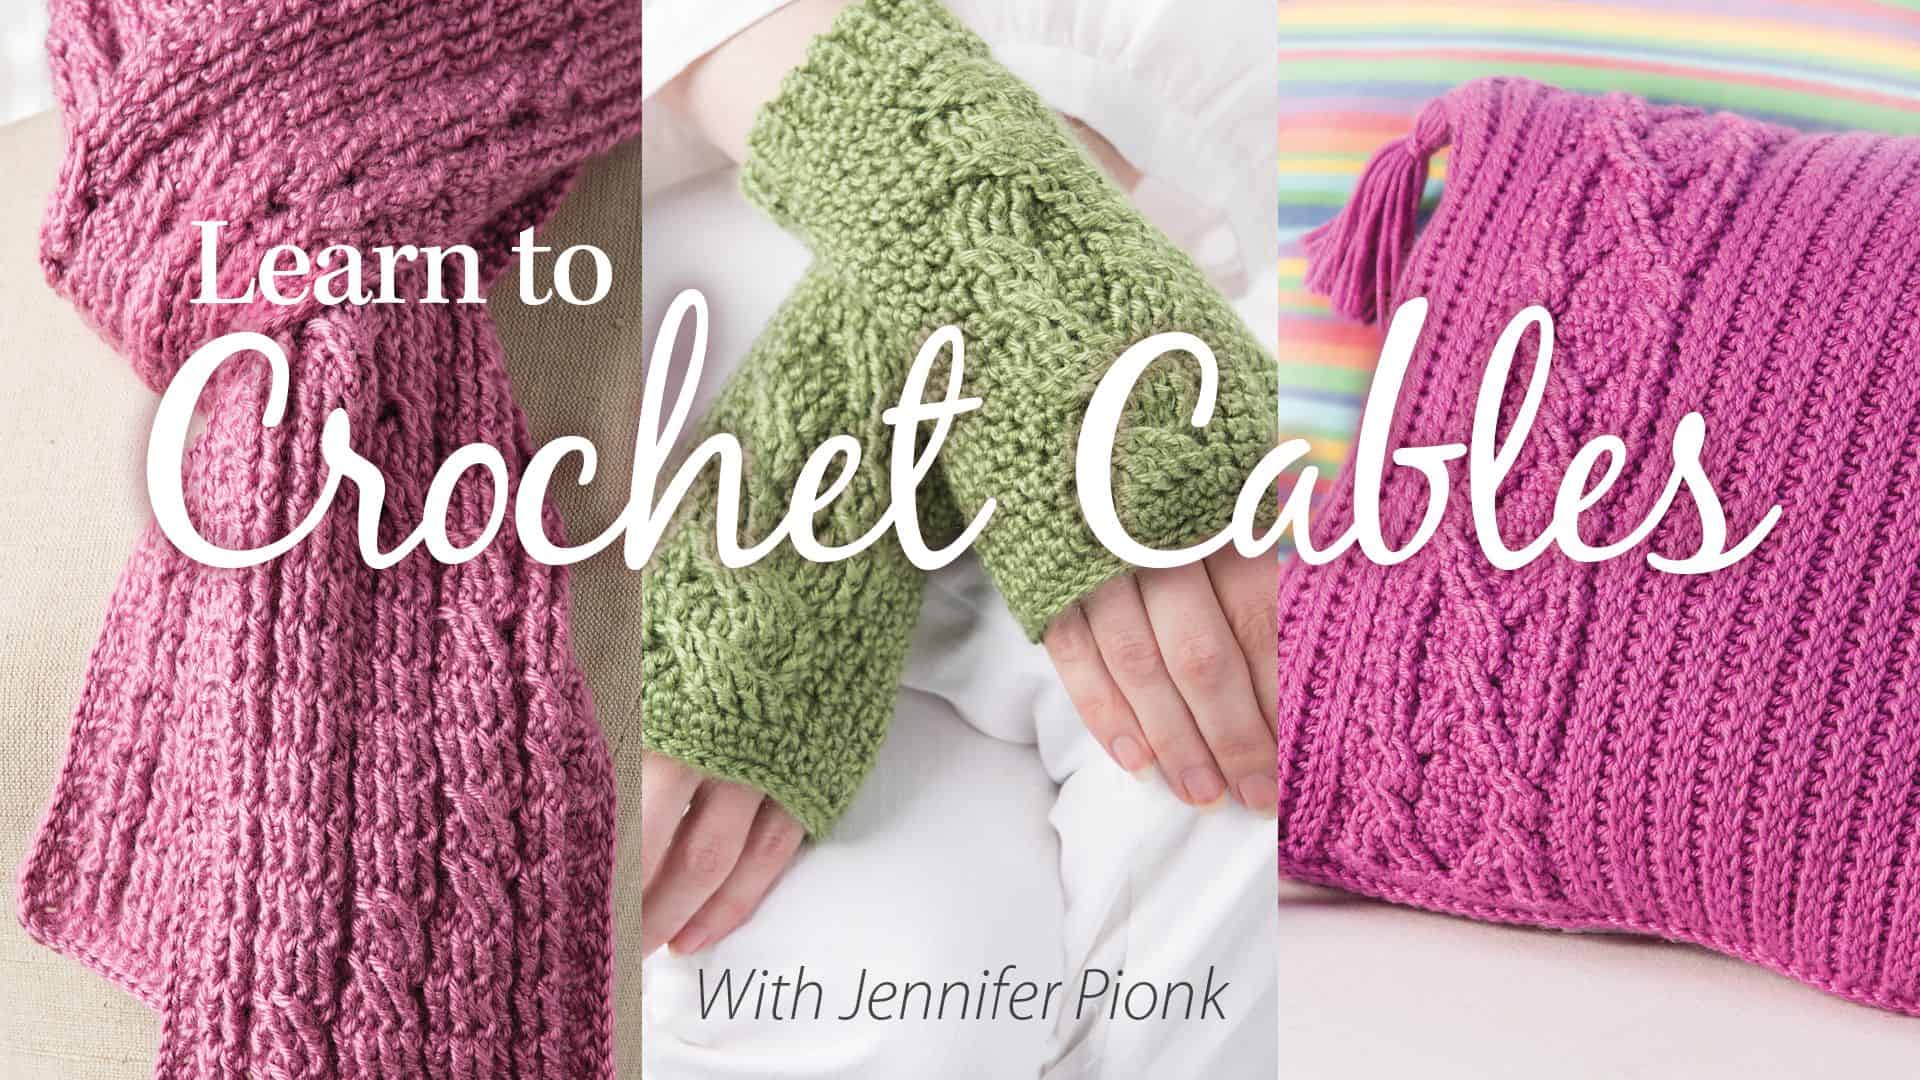 Cable Knitting For Beginners - Sara's Craft Corner